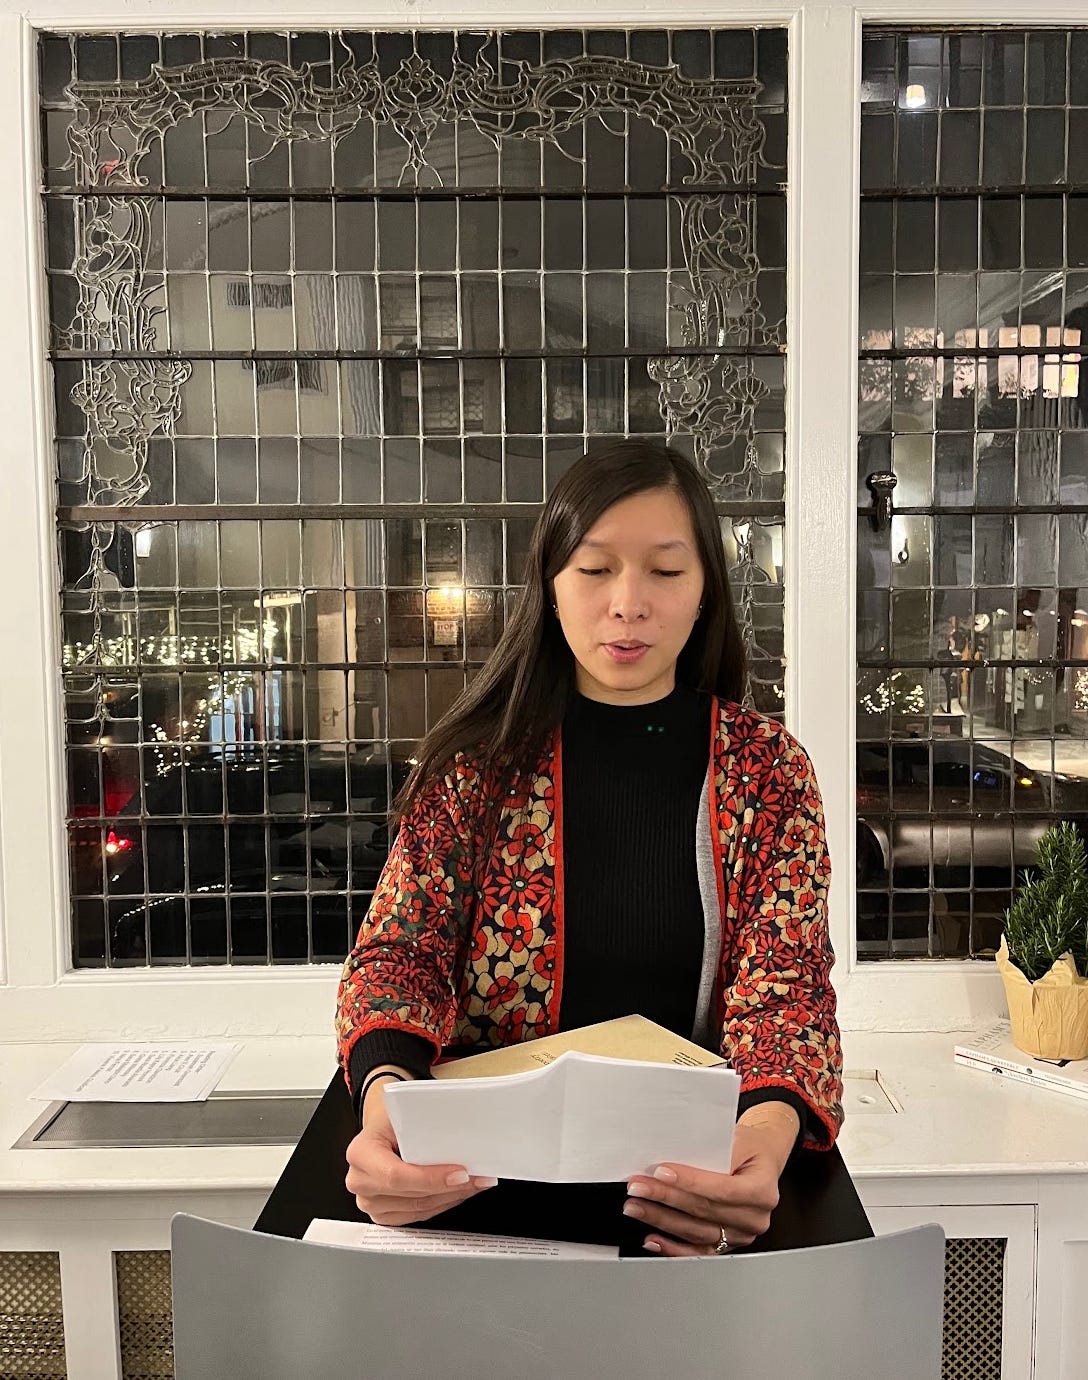 Me reading from a piece of paper at the NYU writer's house